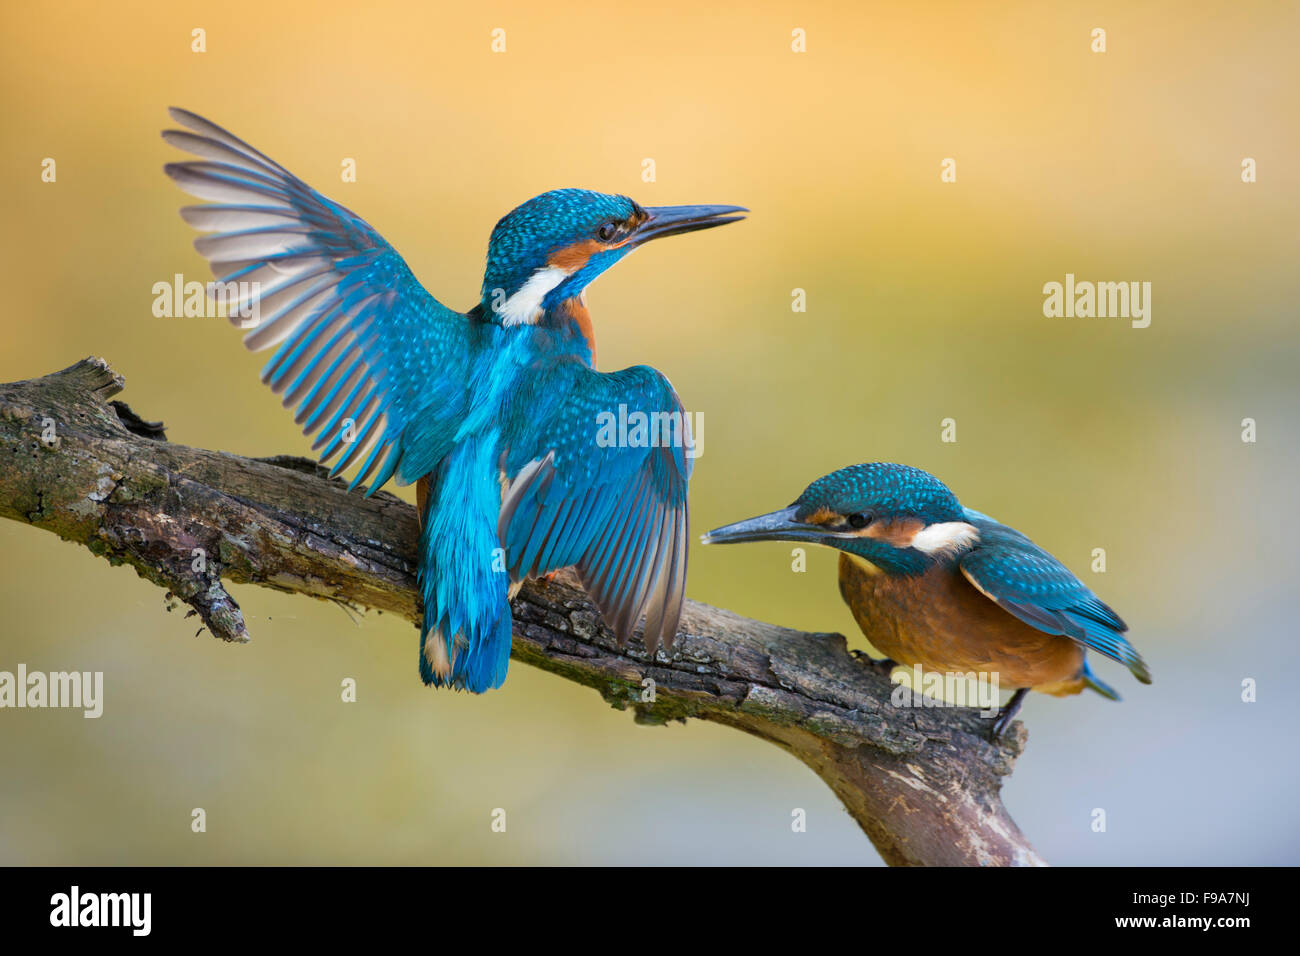 Territorial Common Kingfisher / Kingfisher / Eisvogel  ( Alcedo atthis ) male adult in struggle with its fledgling. Stock Photo